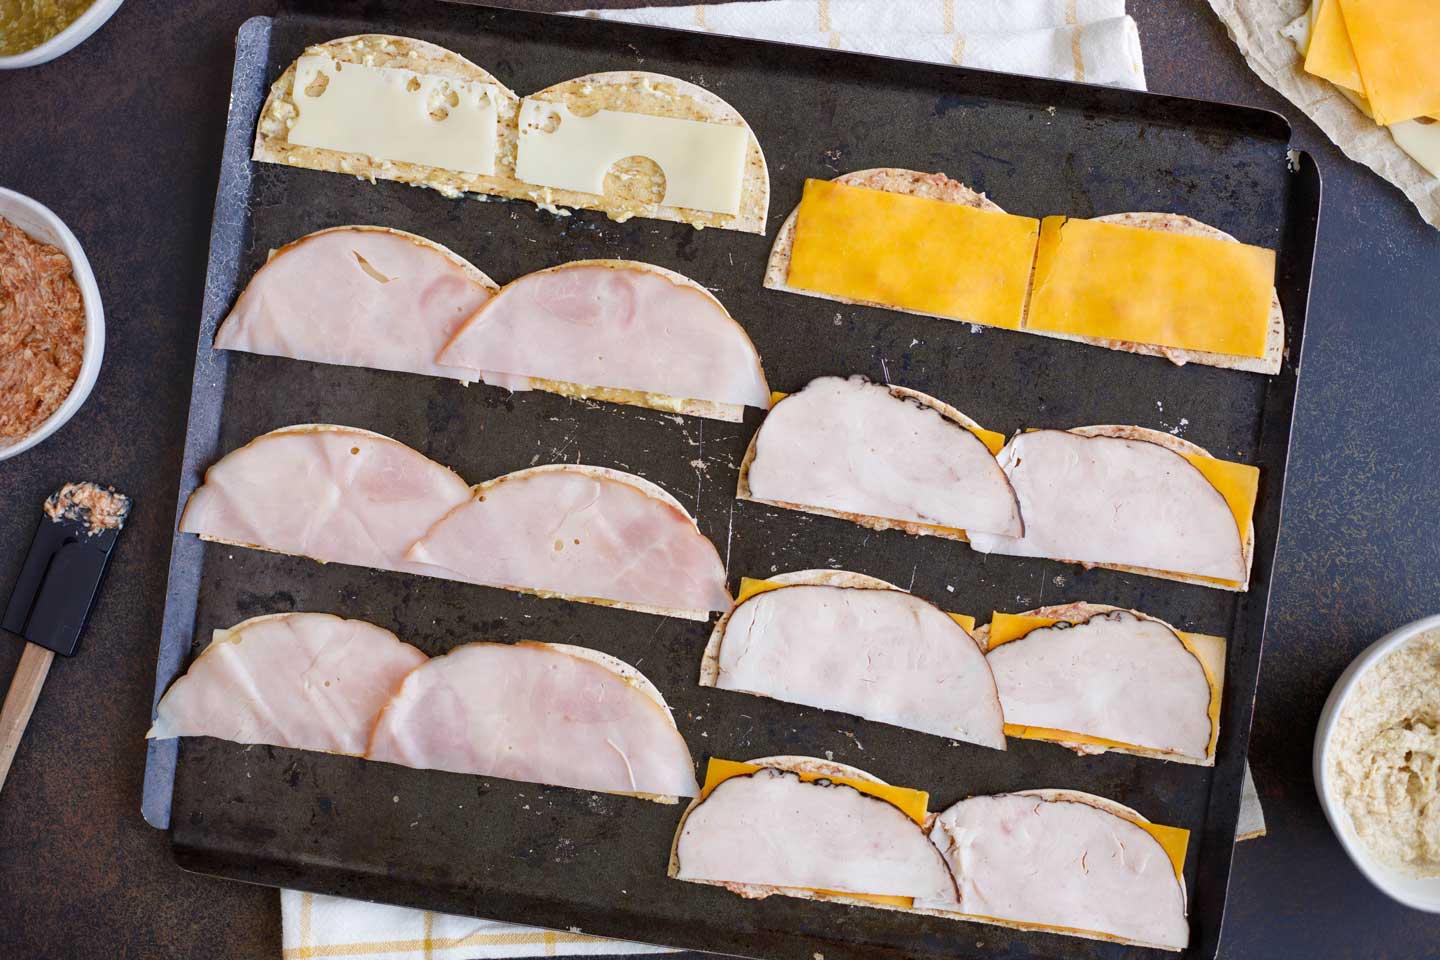 Deli meats added on top of cheeses - the next step in making these party sandwiches